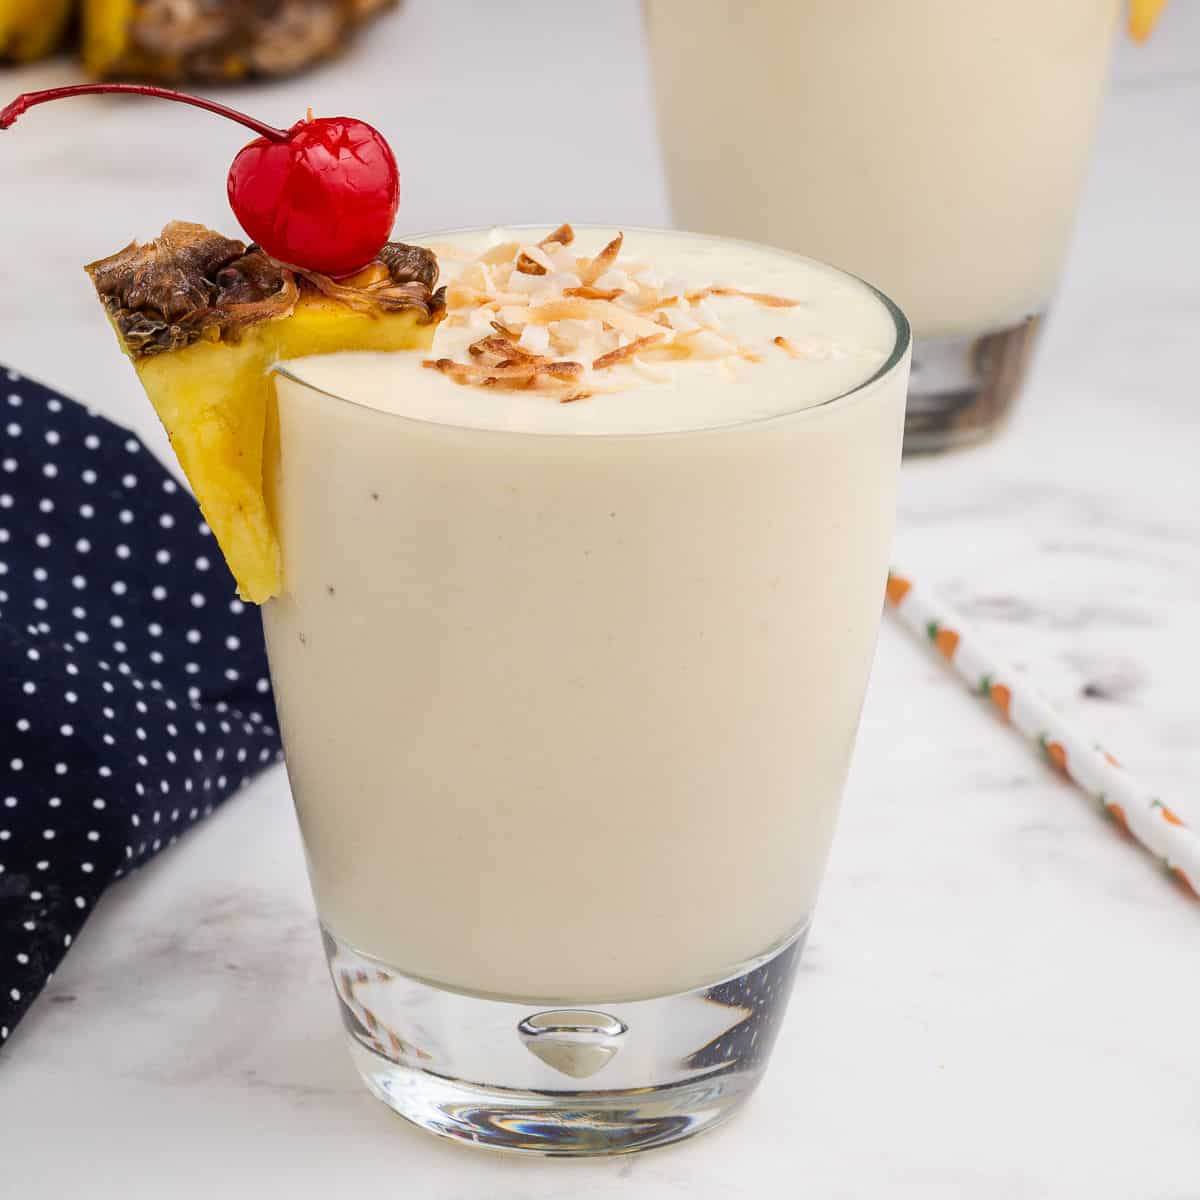 Get a taste of summer with this refreshing Pina Colada Smoothie. Packed with flavor and protein, it's a fabulous workout recovery smoothie or poolside sipper.